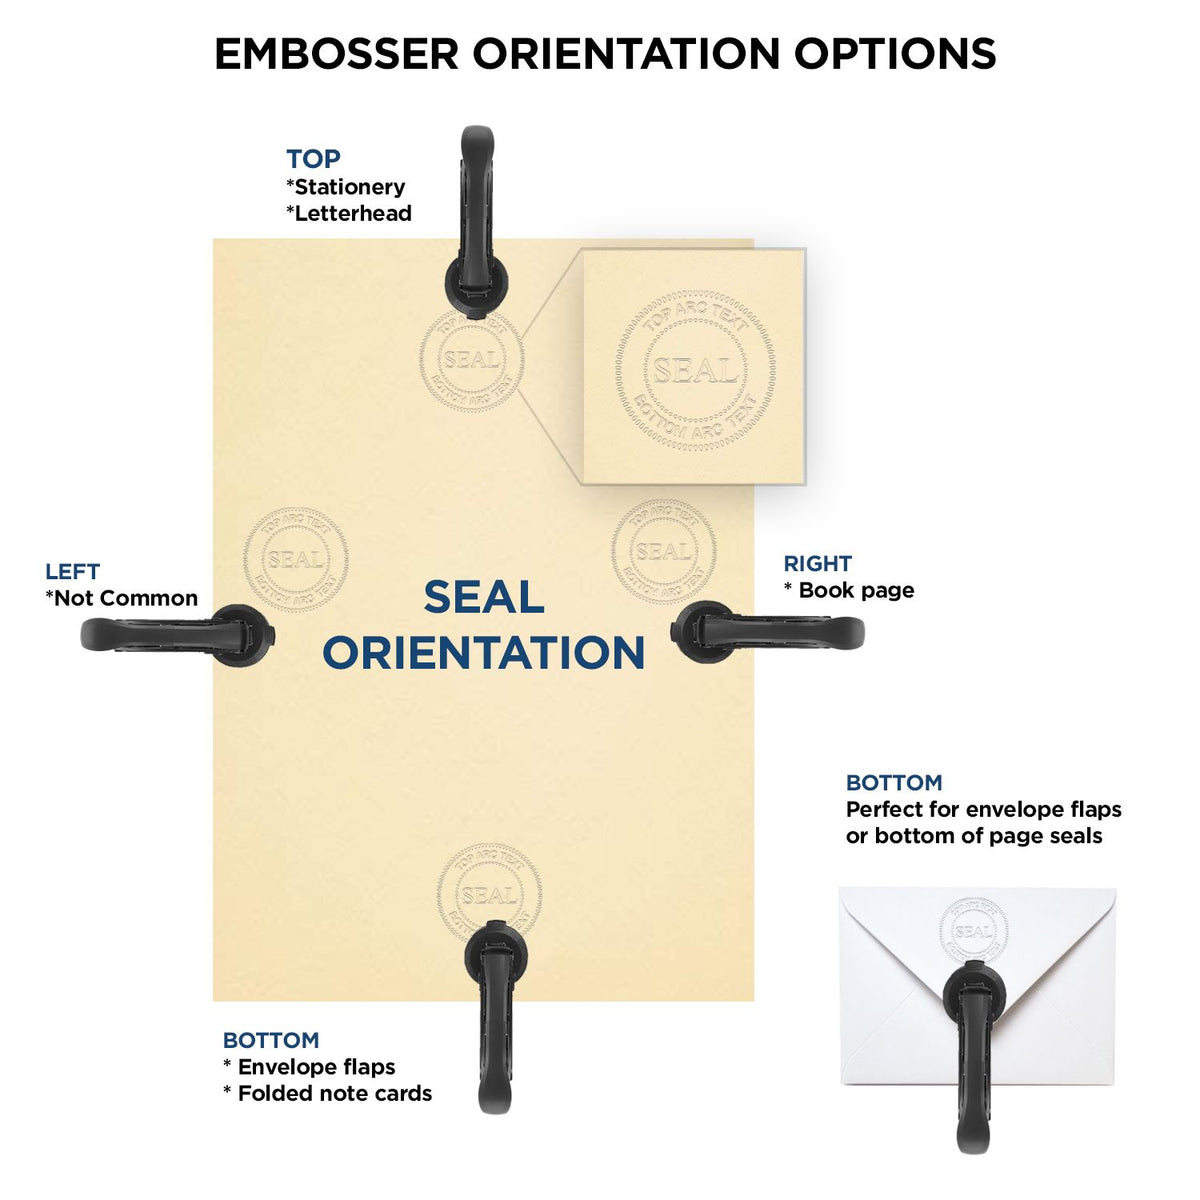 An infographic for the Gift Tennessee Land Surveyor Seal showing embosser orientation, this is showing examples of a top, bottom, right and left insert.